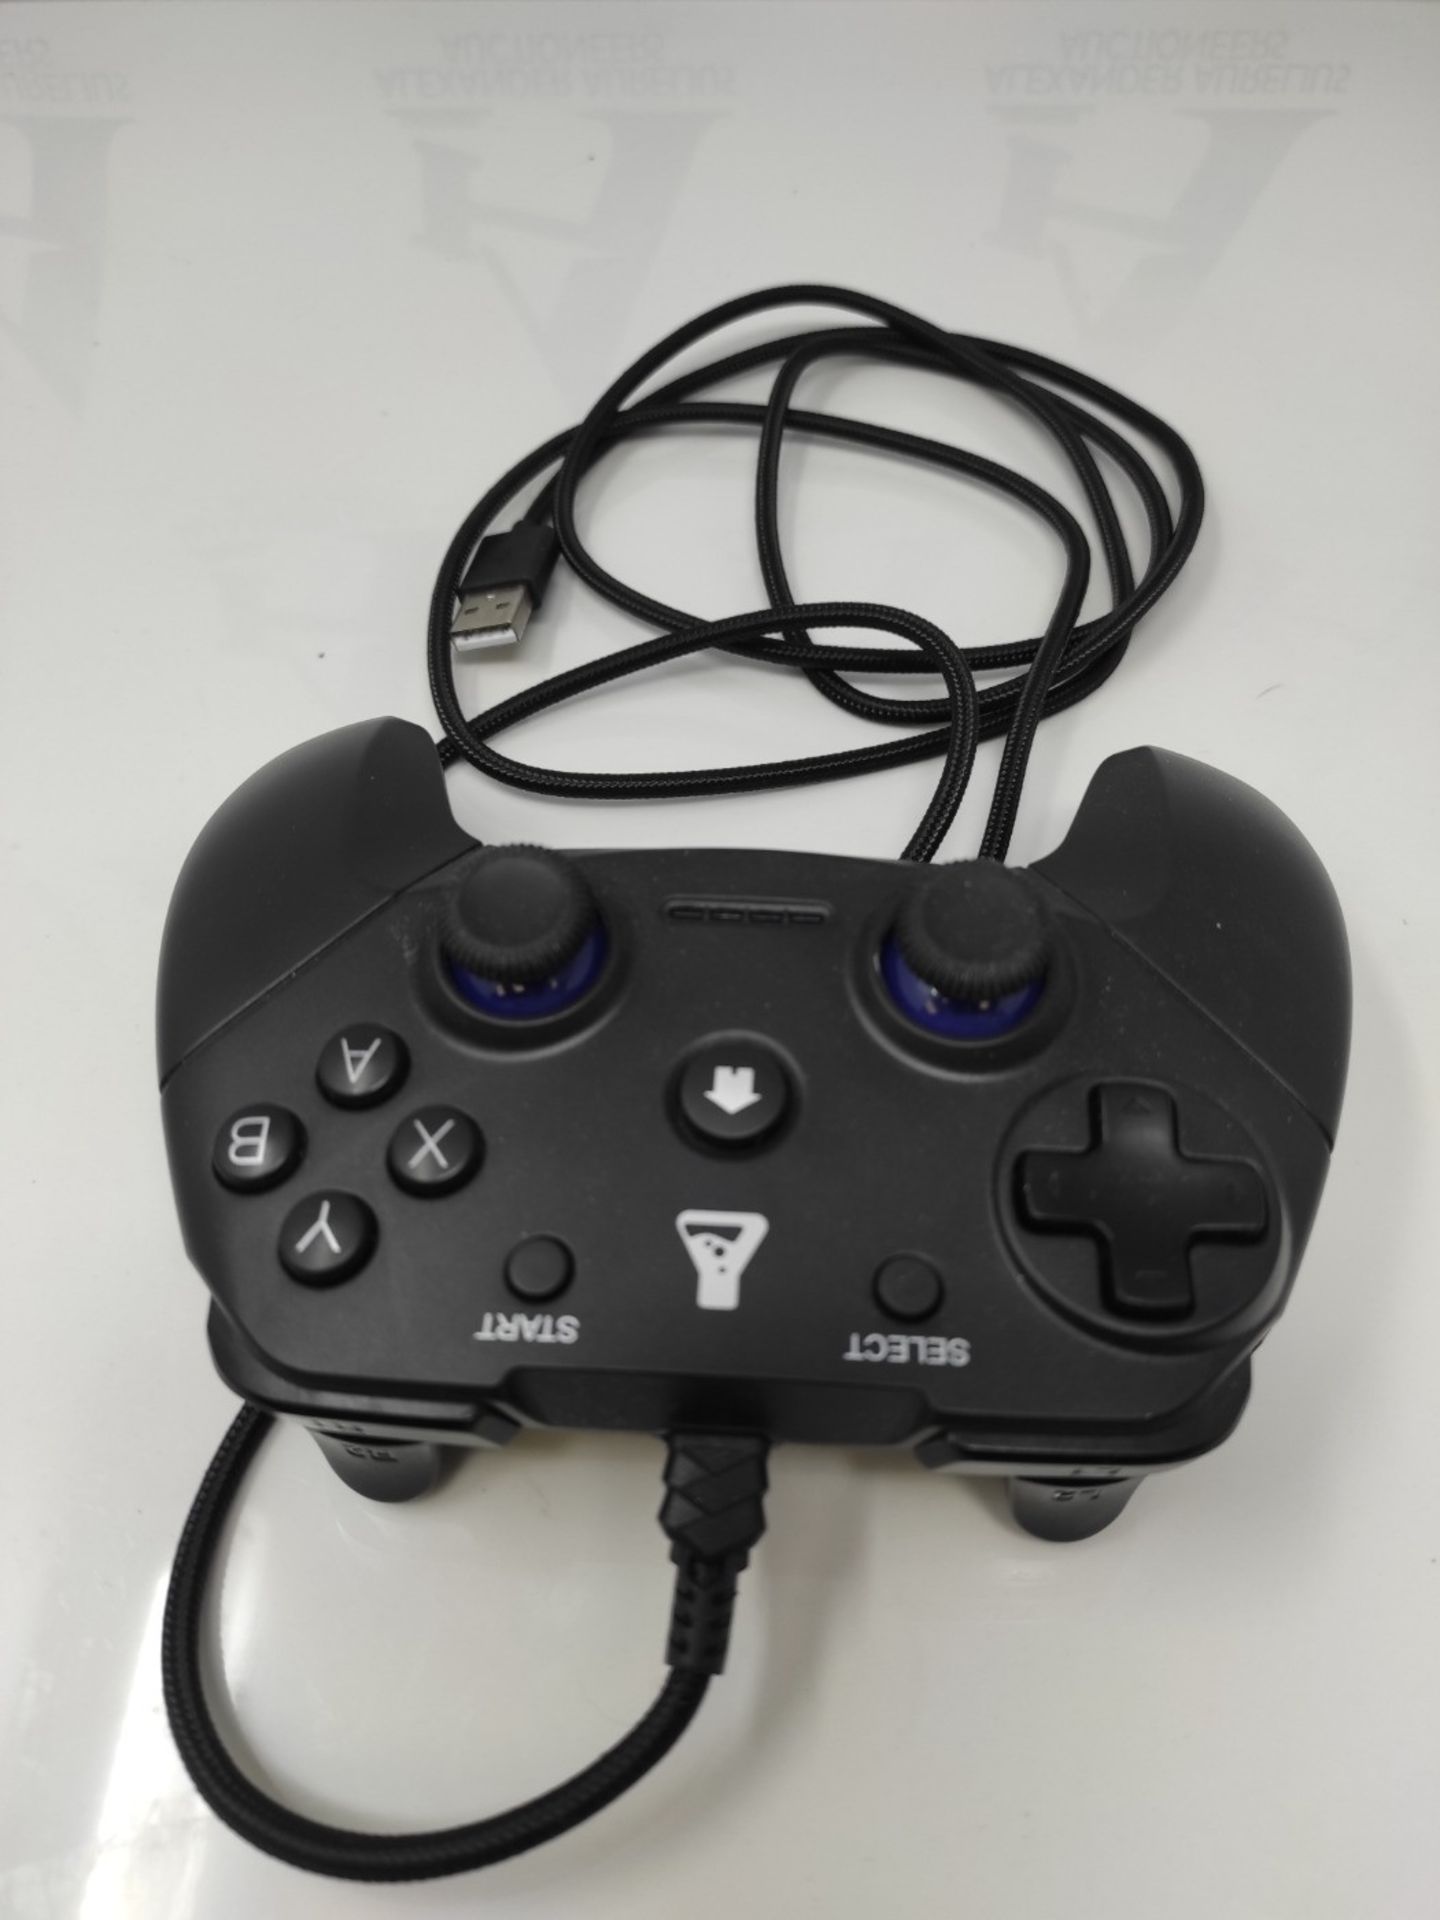 THE G-LAB K-Pad Thorium Game Controller for PC and Ps3 USB with Cable - Integrated Vib - Image 2 of 4